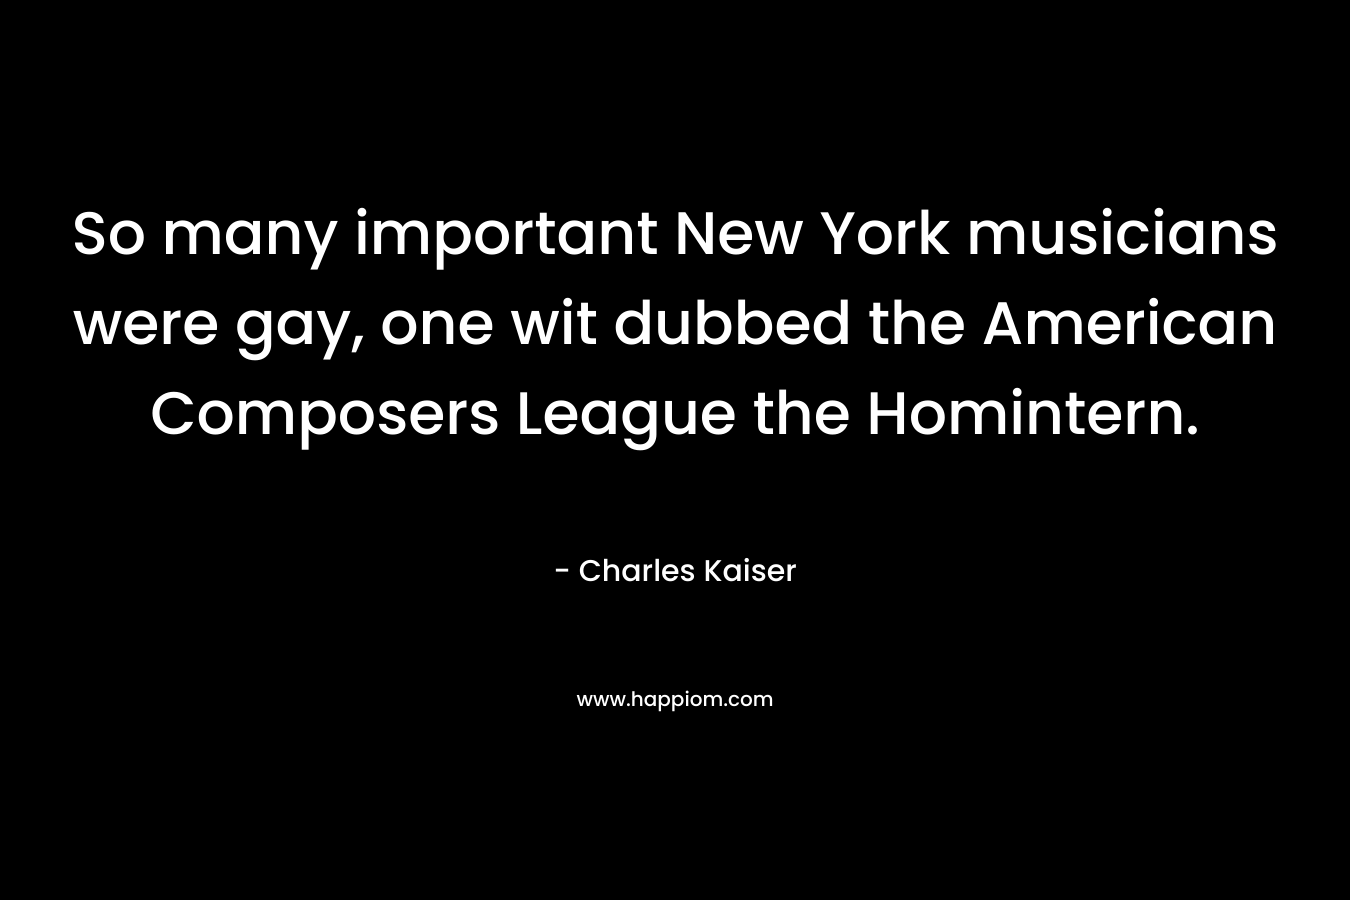 So many important New York musicians were gay, one wit dubbed the American Composers League the Homintern. – Charles Kaiser